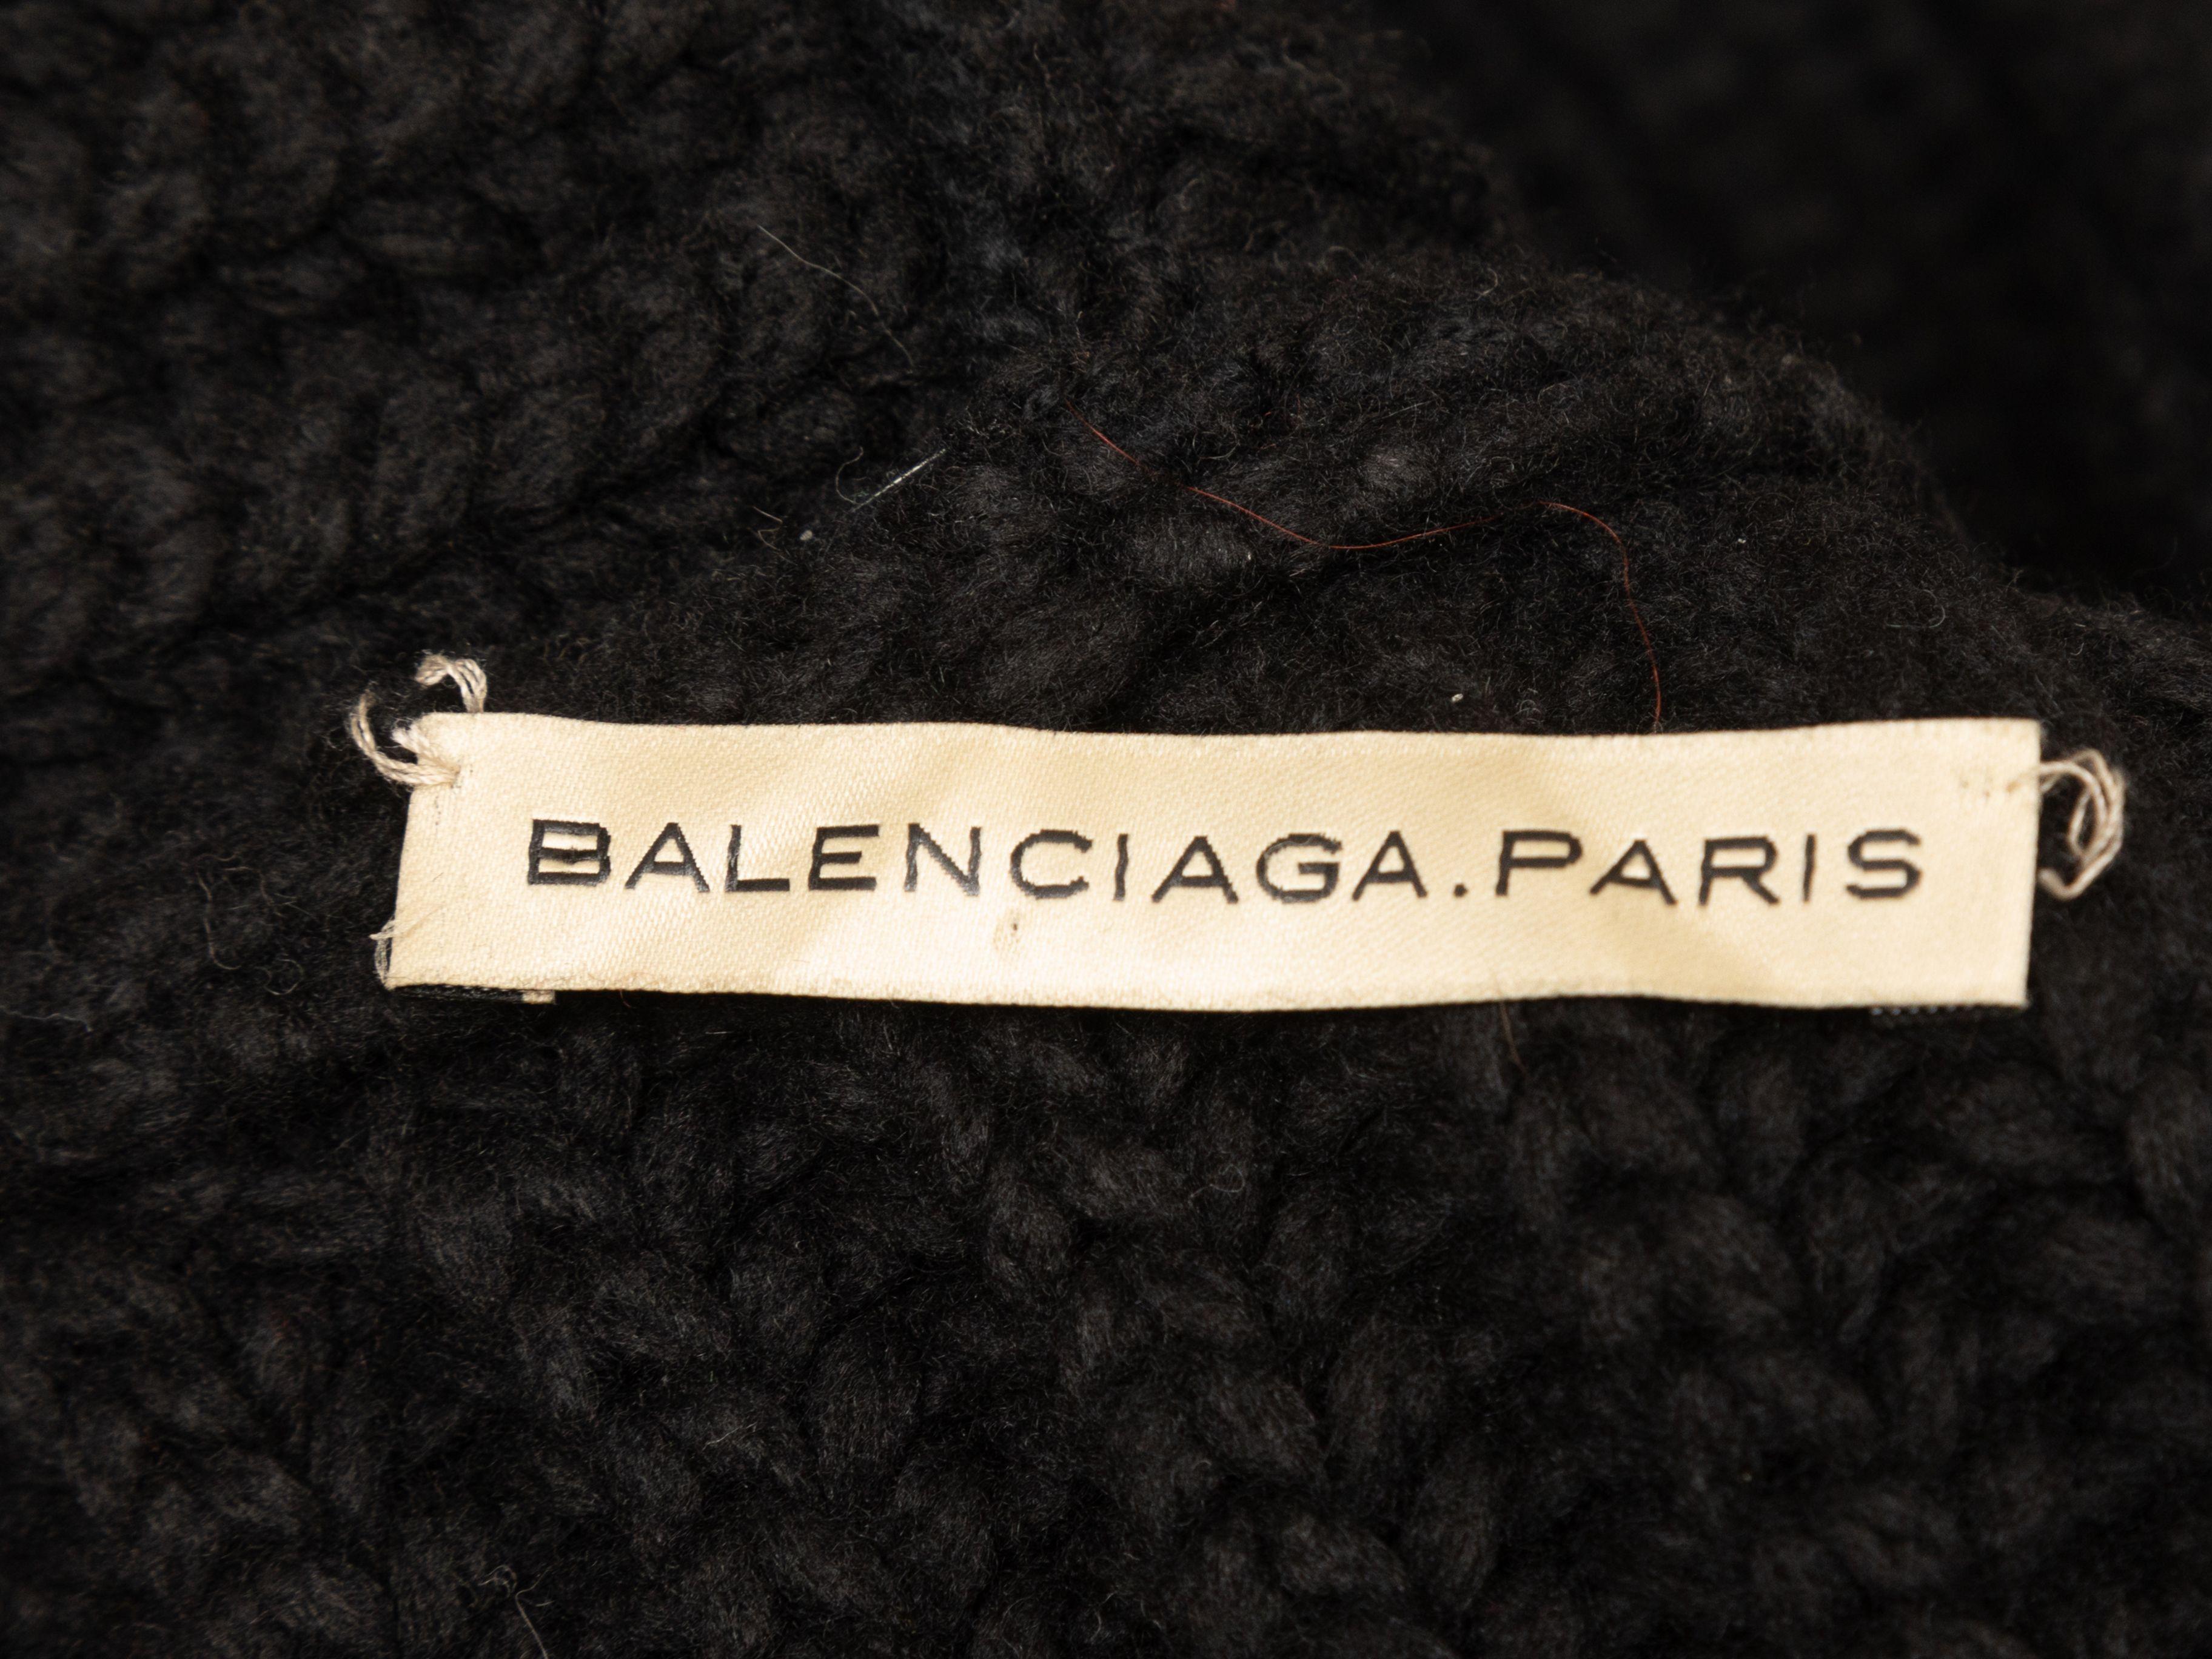 Product Details: Black wool rib knit layered vest by Balenciaga. V-neck. Closures at center front. Designer size 38. 38